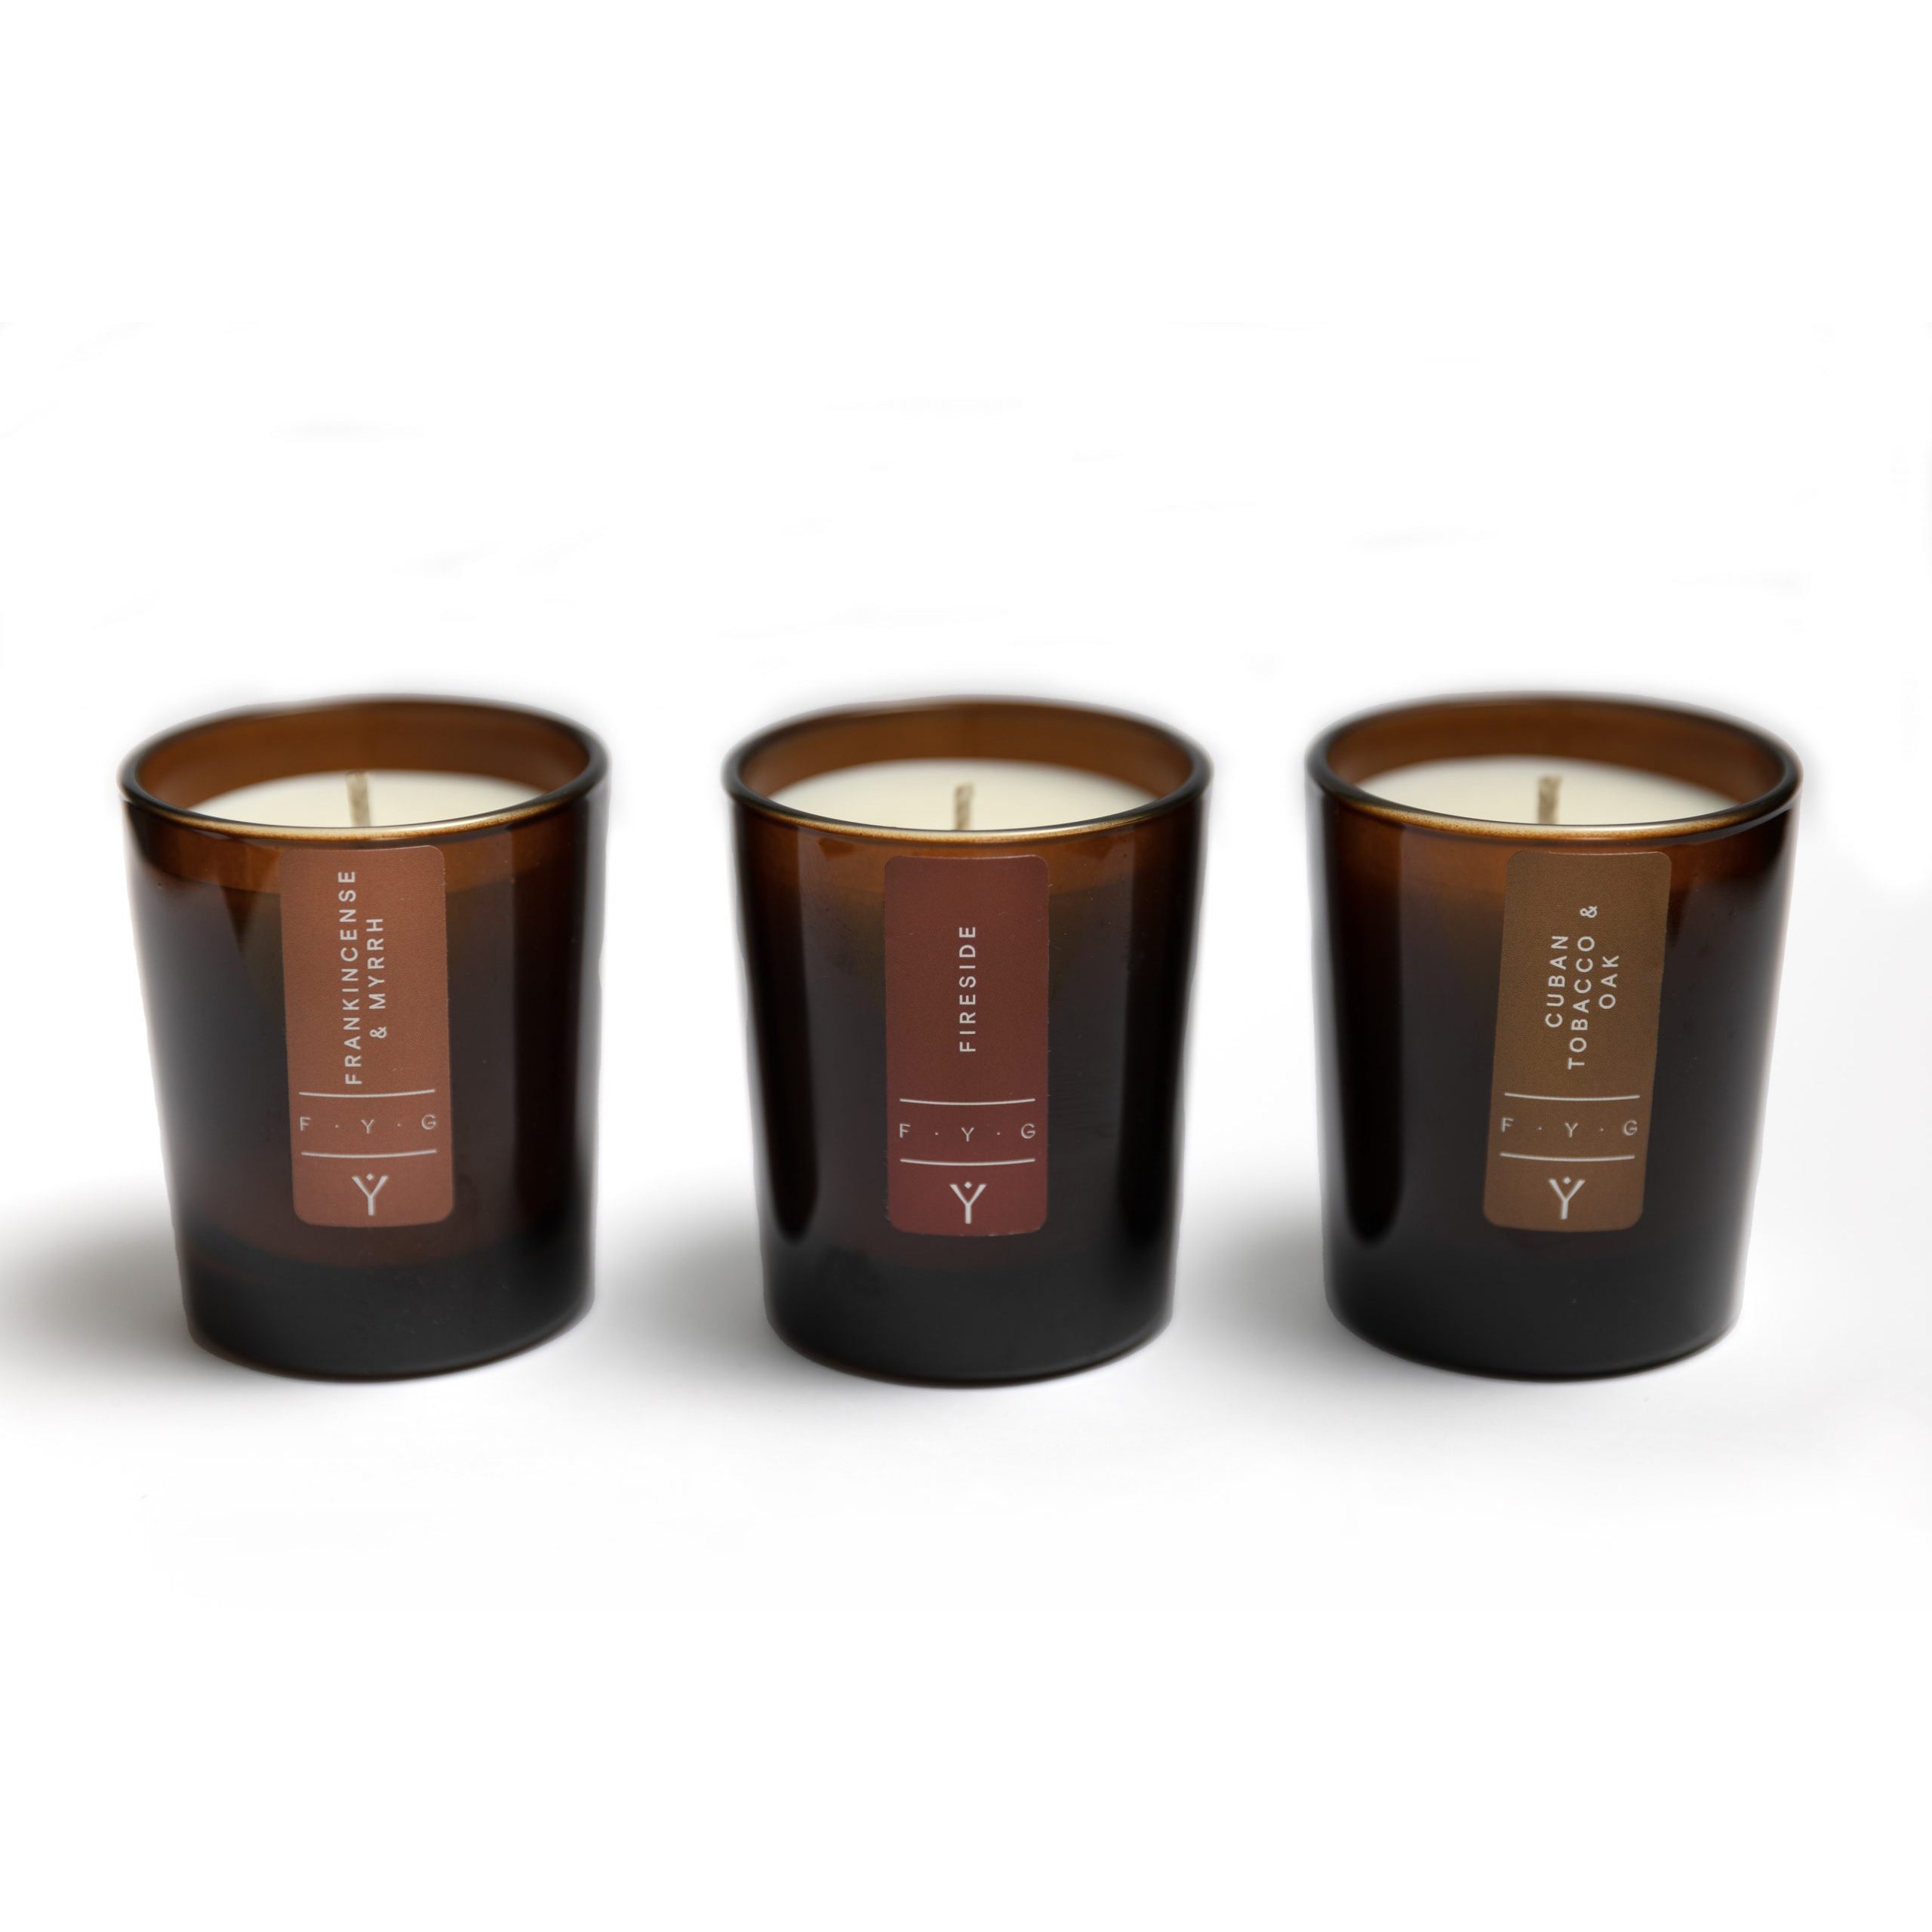 FYG The Ignite Collection Candle Gift Set of 3